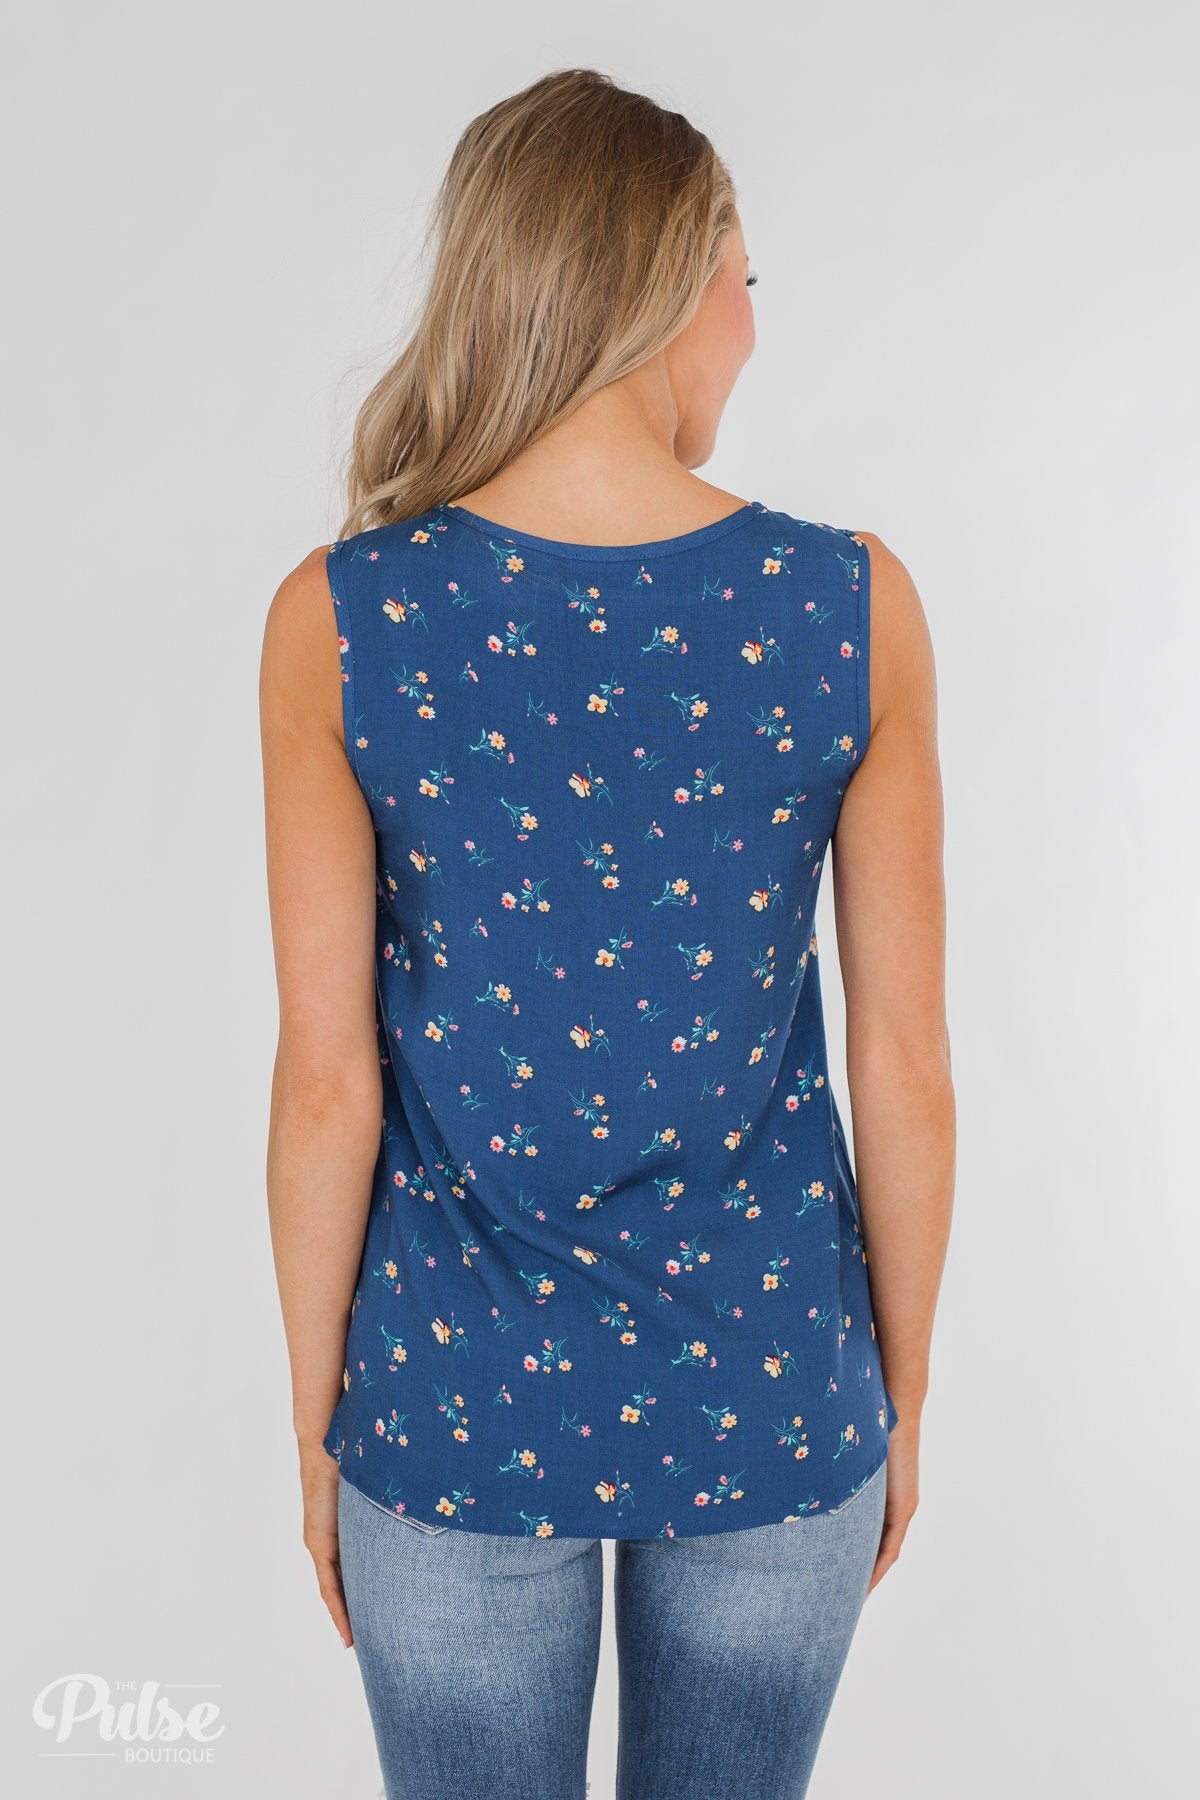 Spring Blooms Floral Tank Top- Sapphire Blue